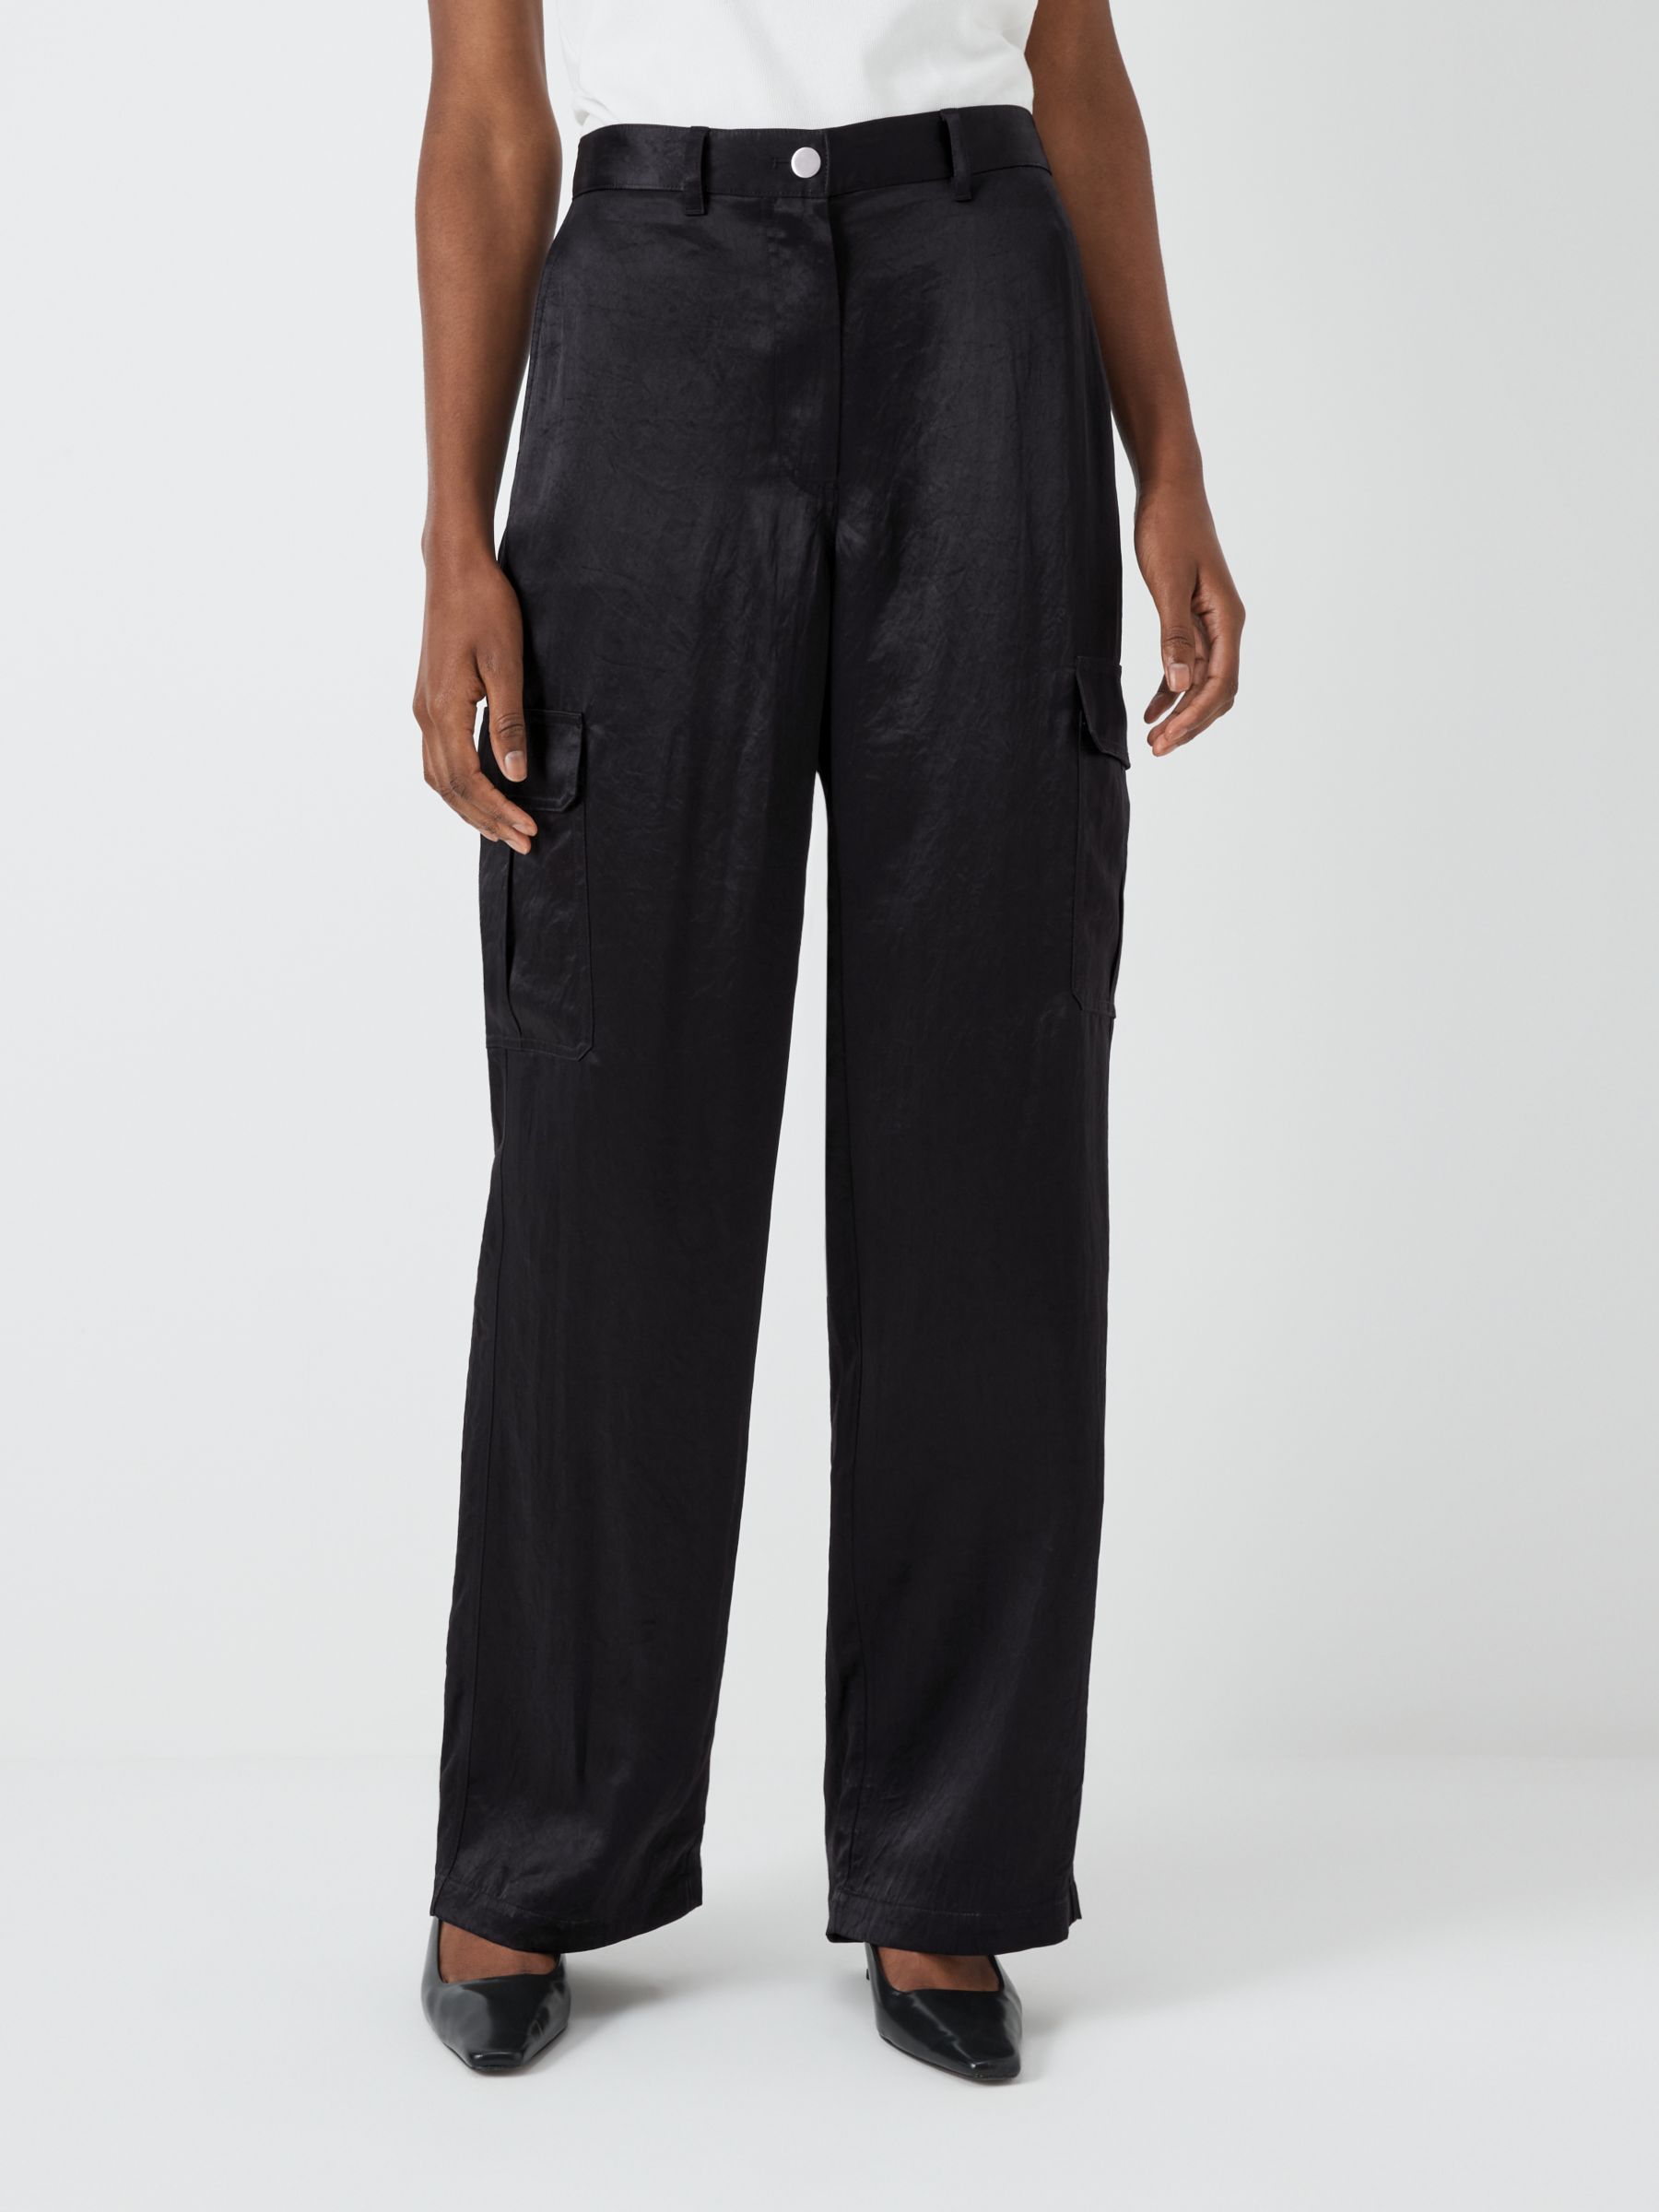 Theory Satin Cargo Trousers, Black at John Lewis & Partners